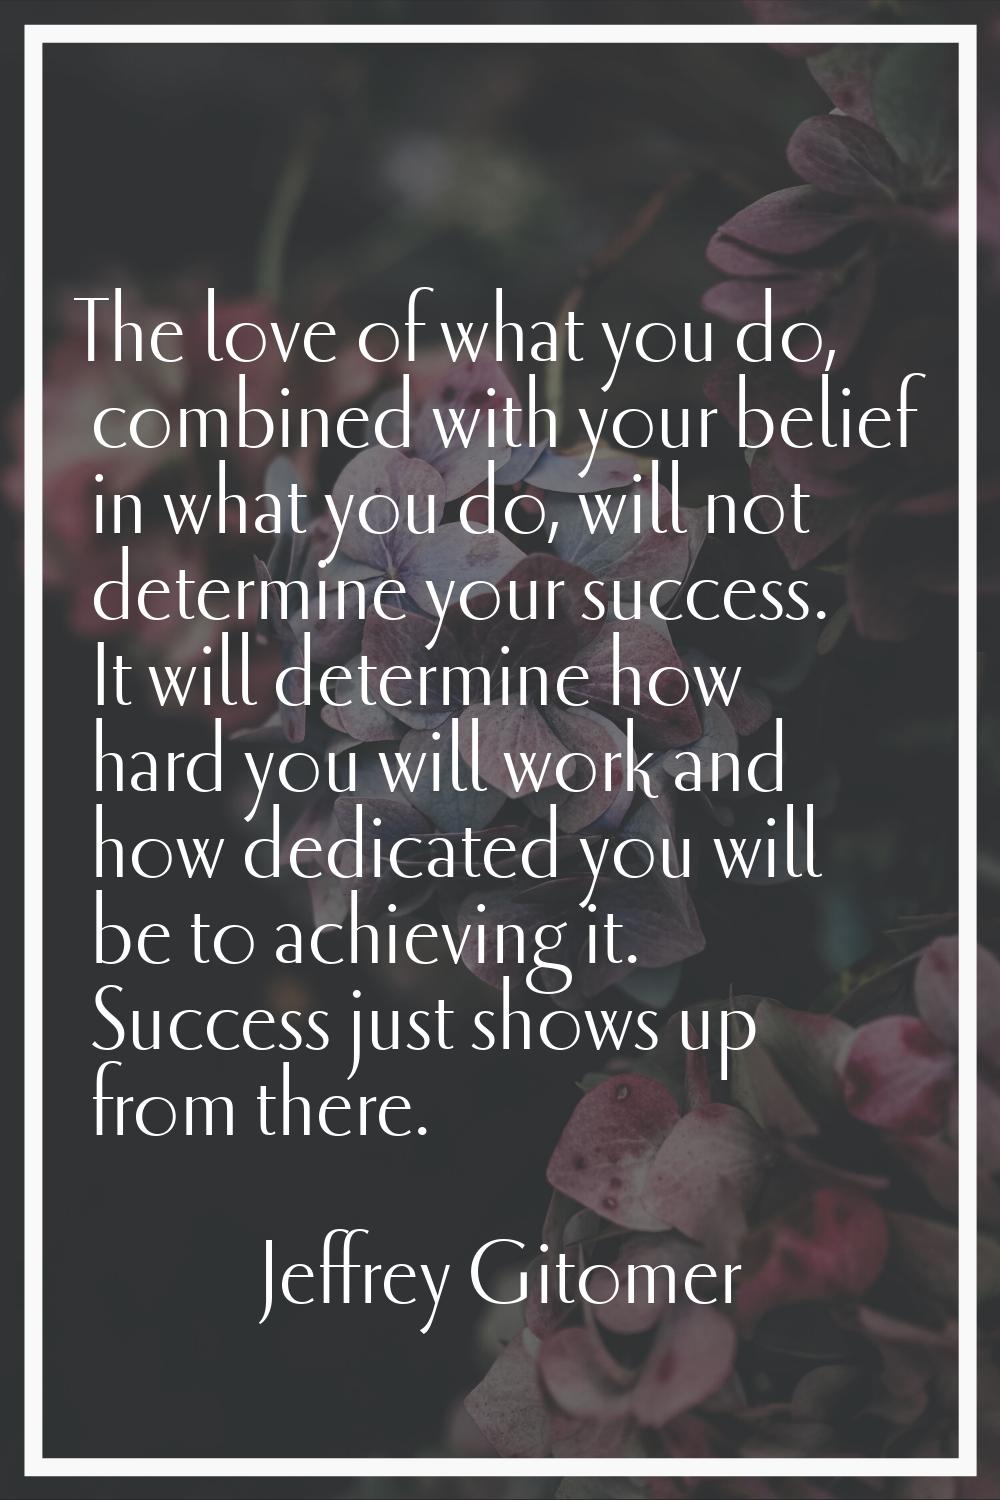 The love of what you do, combined with your belief in what you do, will not determine your success.